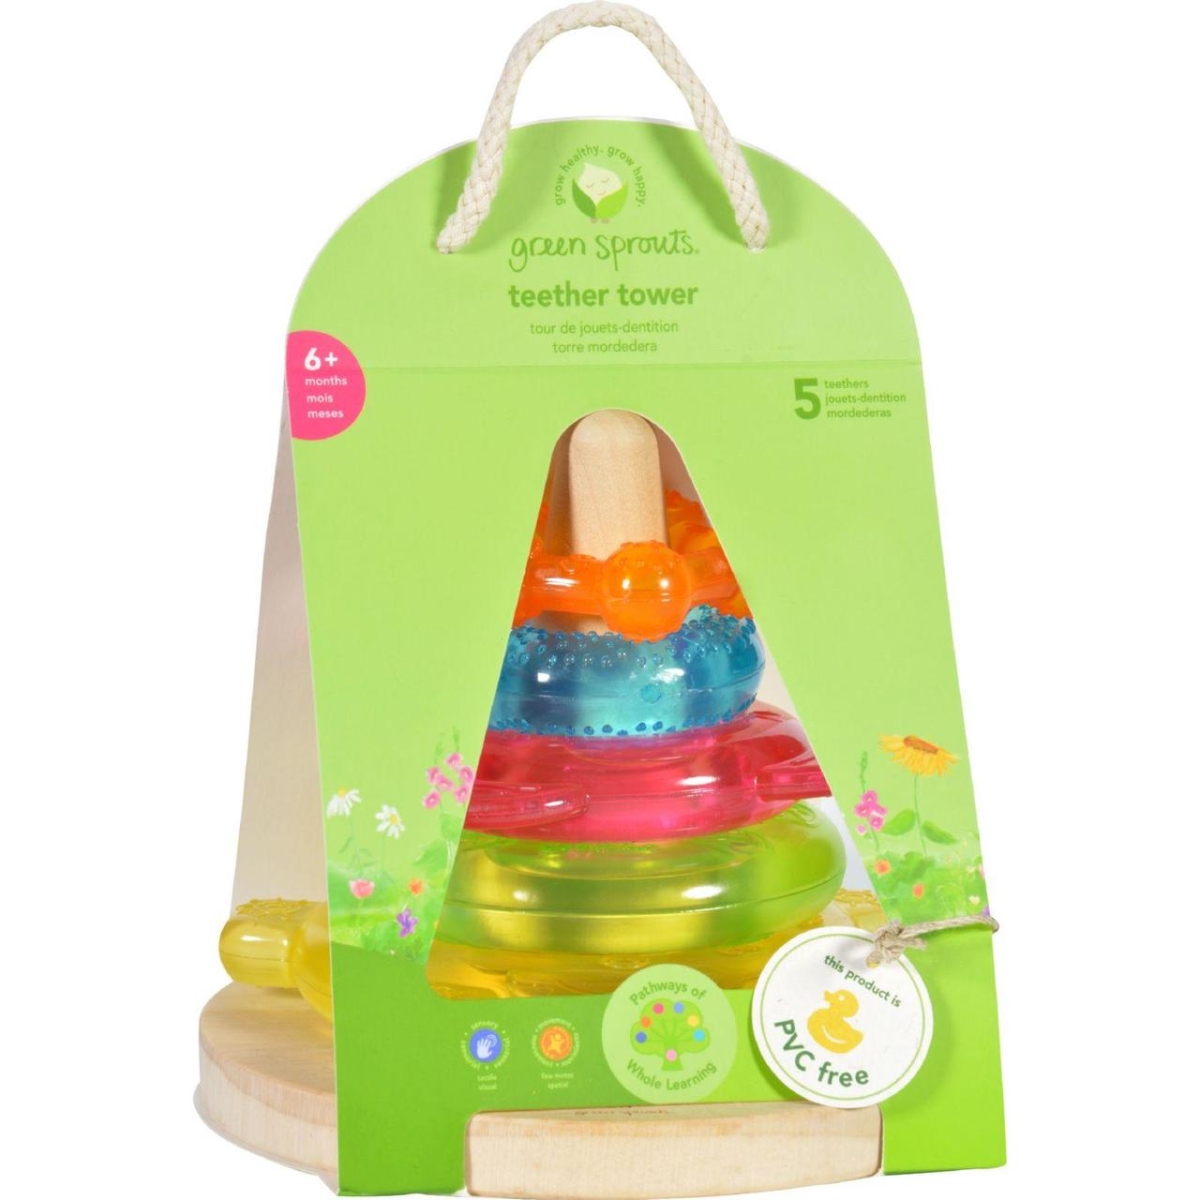 Hg1711795 Stacking Teether Tower - 6 Months Plus, Dream Window